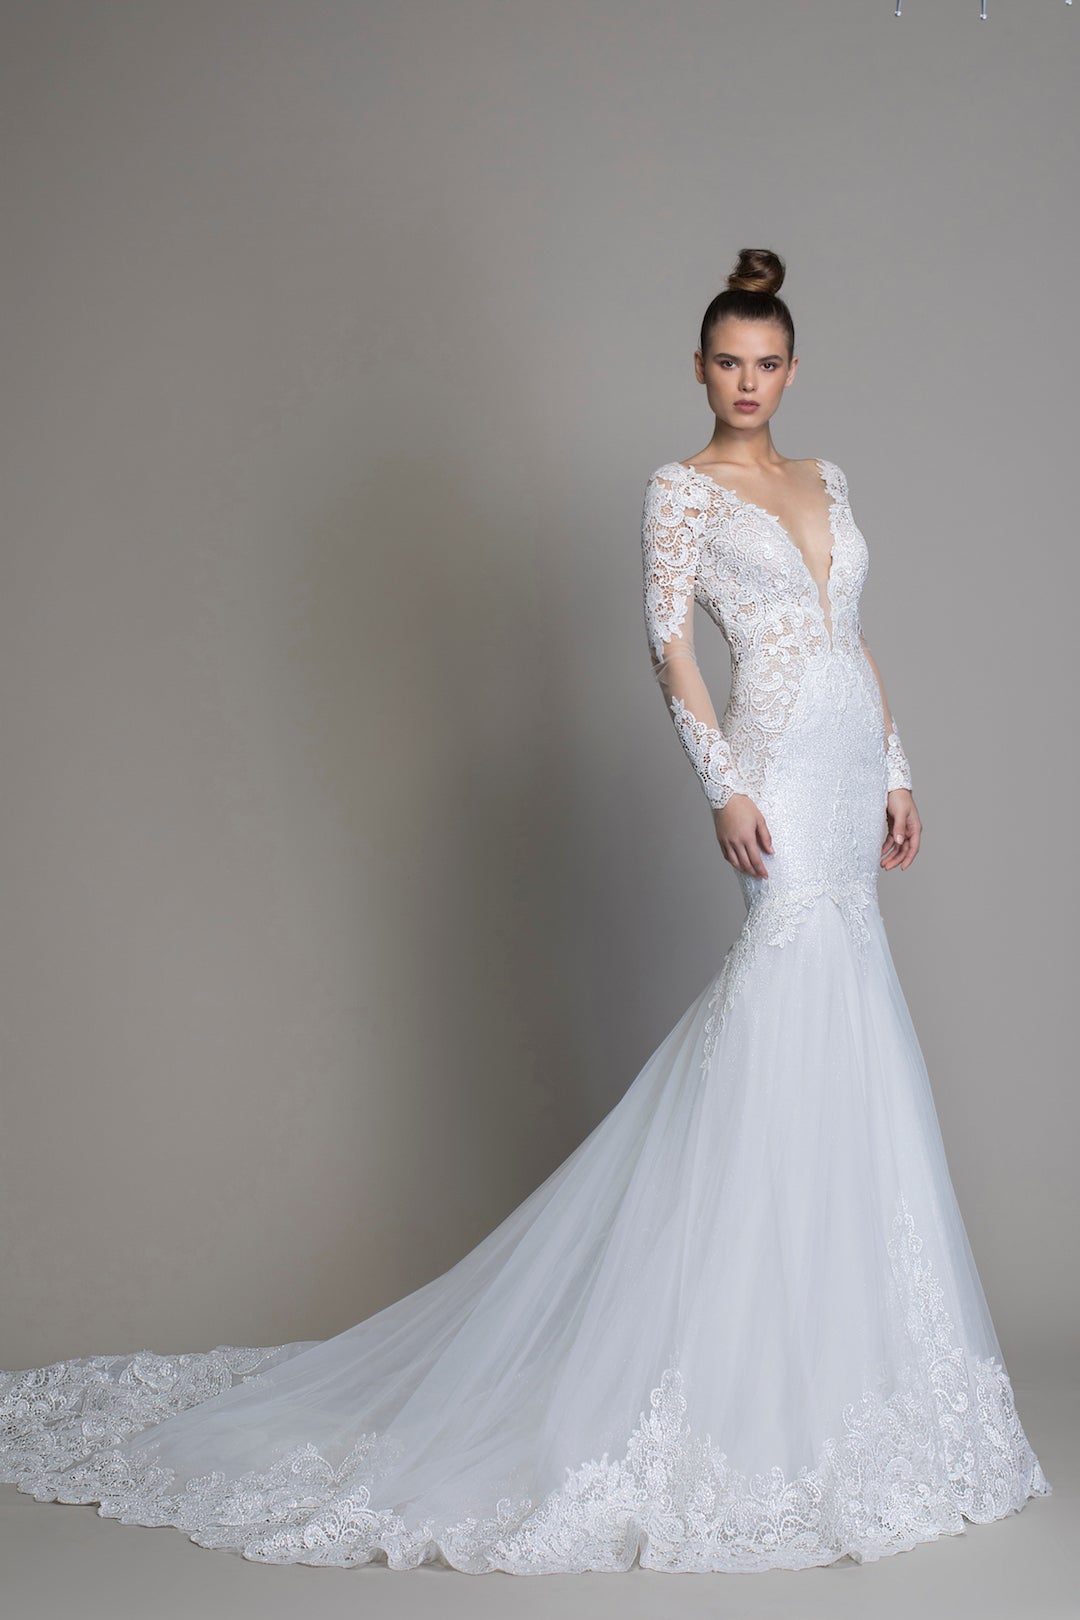 Pnina Tornai's new LOVE 2020 Collection is out! This is style 14766